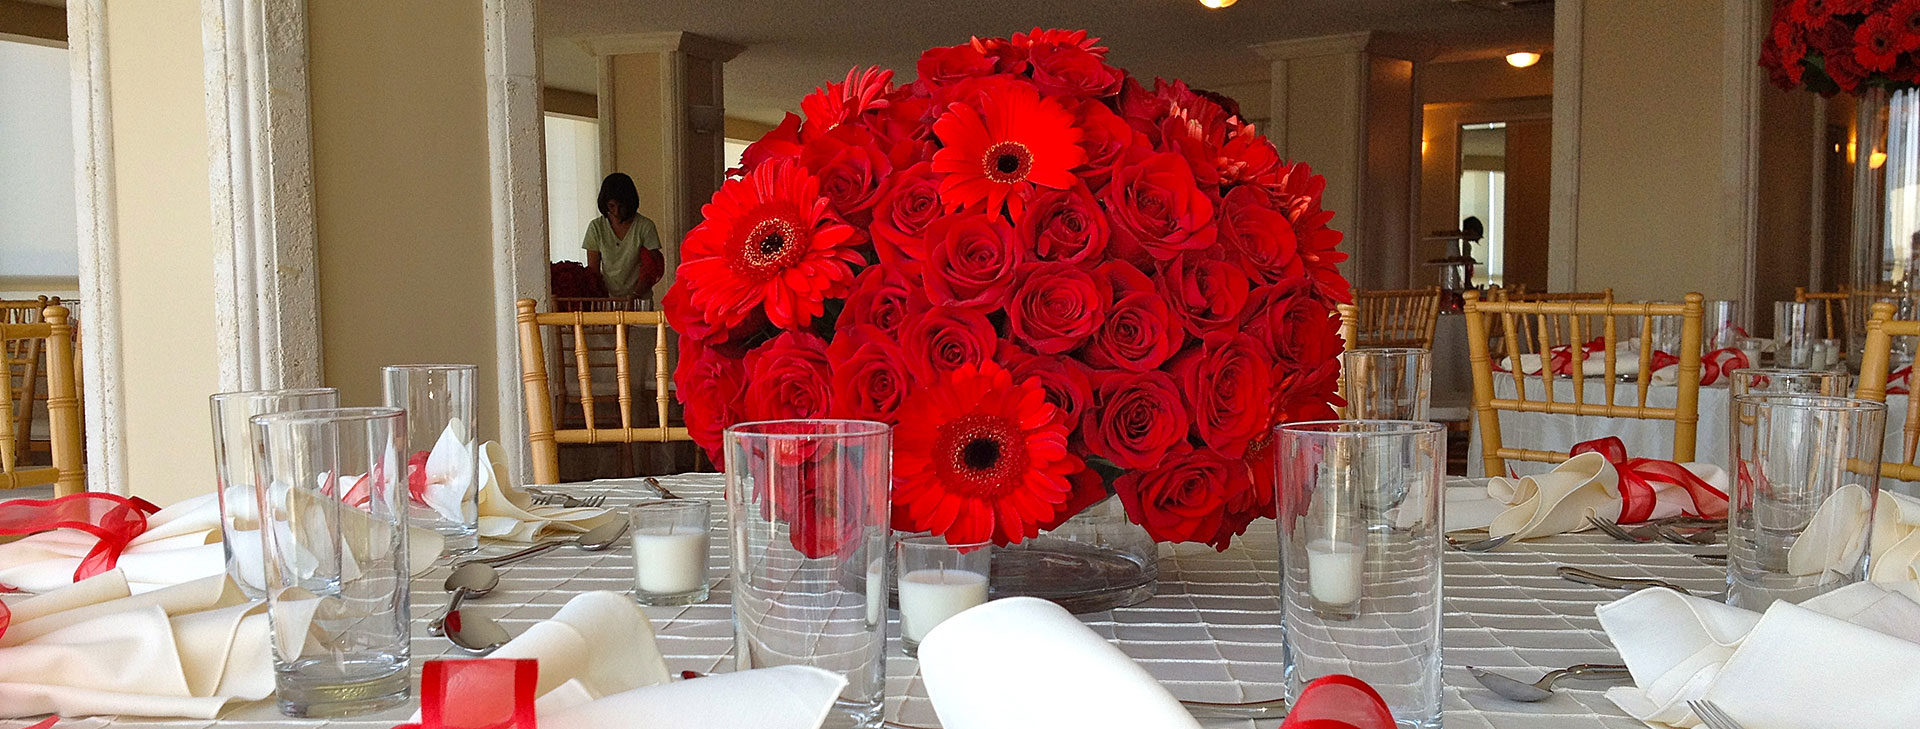 Floral arrangements for social, corporate events and weddings